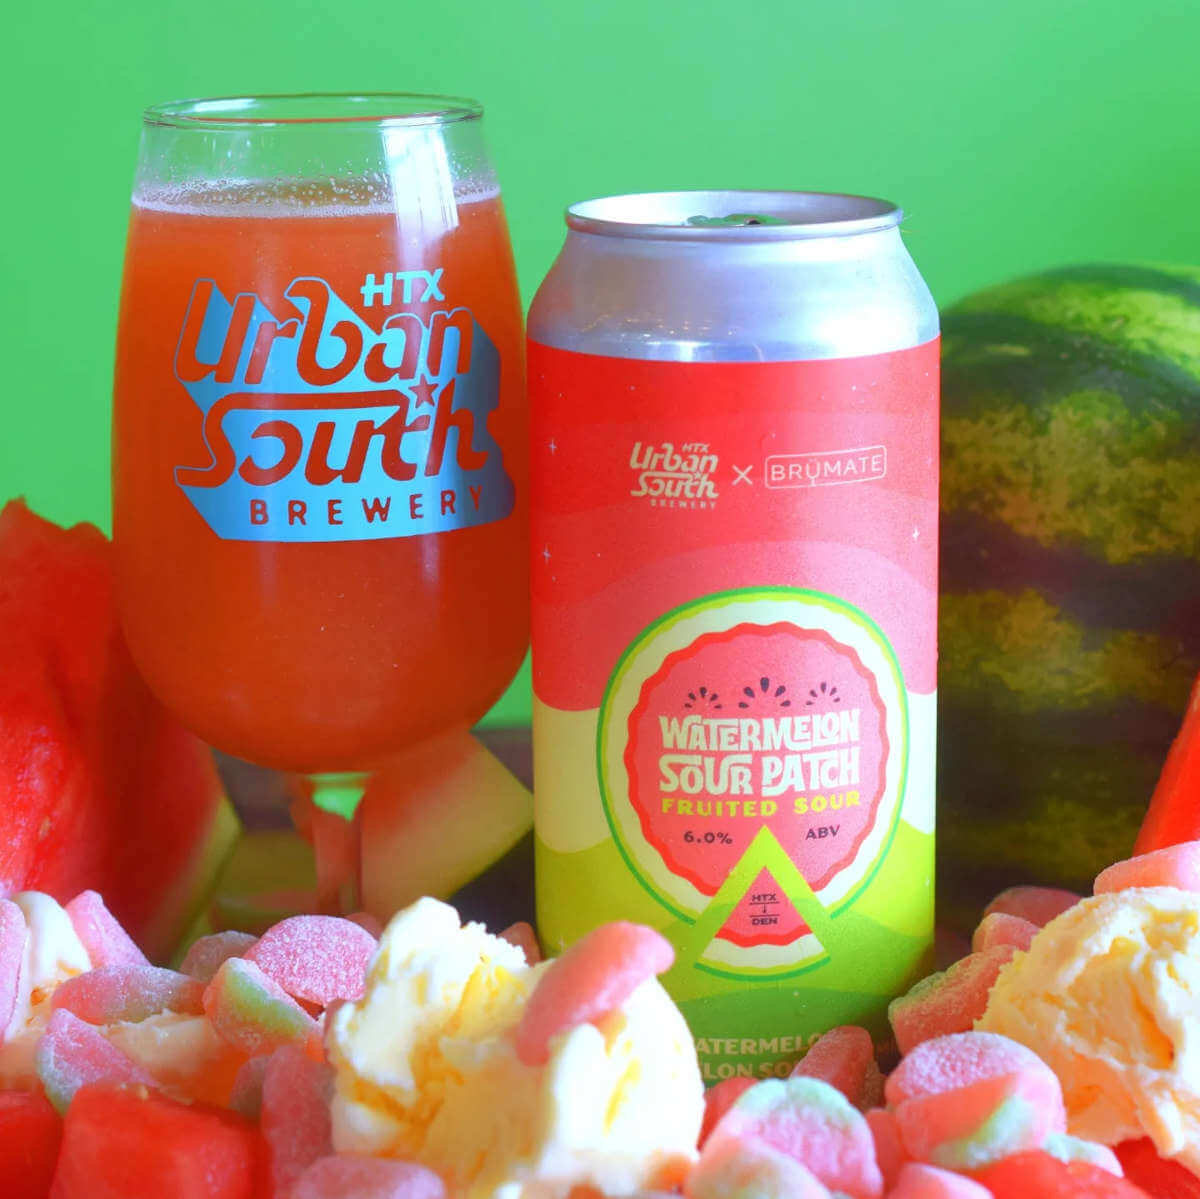 Urban South Brewery Houston collaborates with BrüMate drinkware